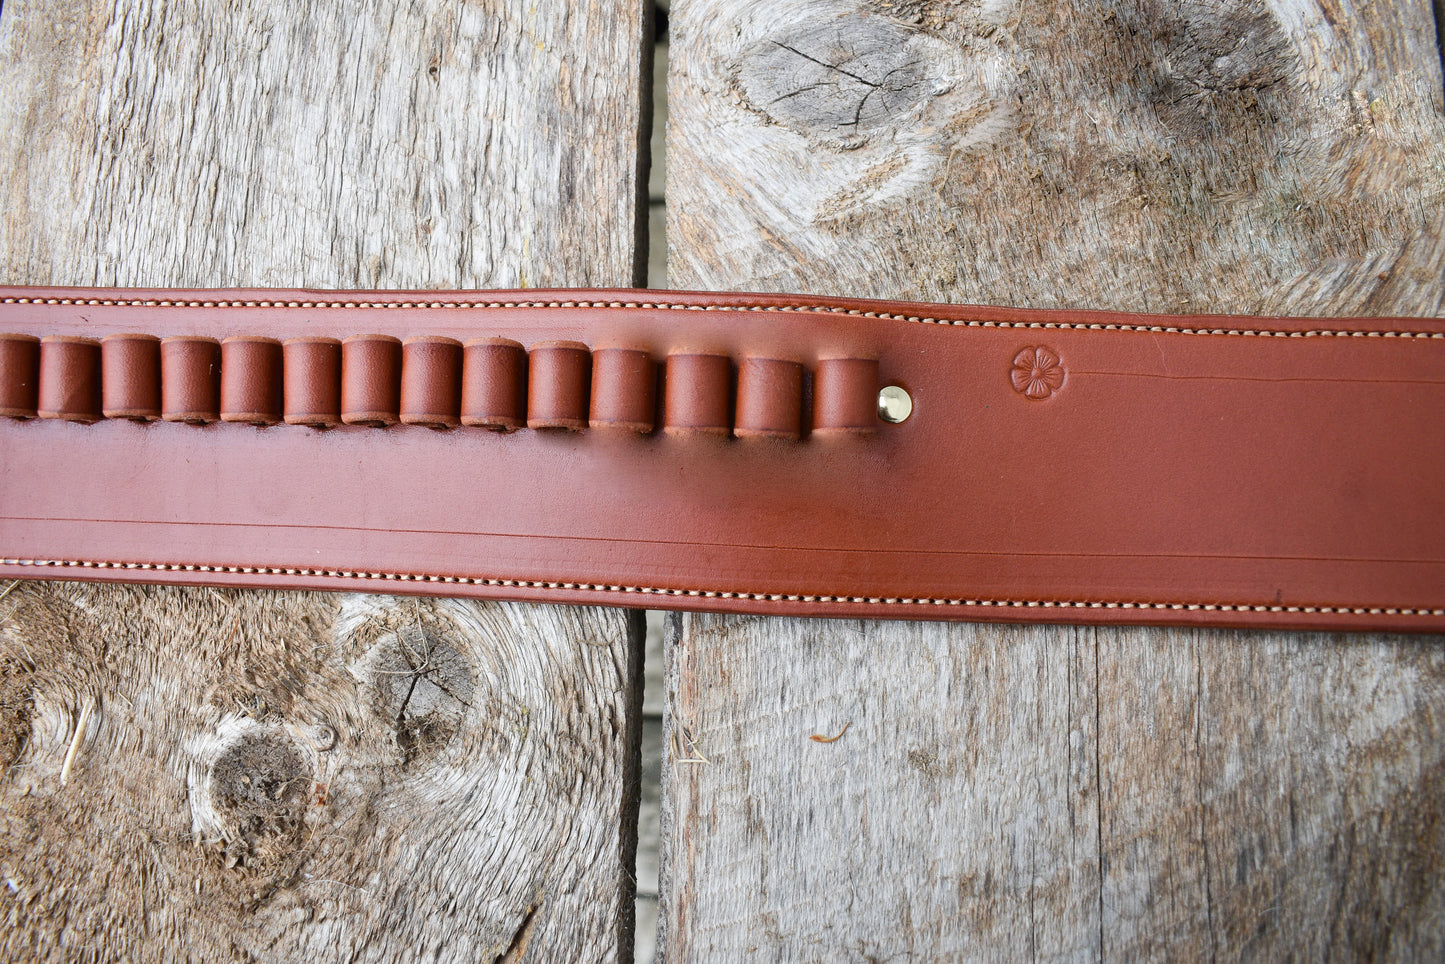 The Thamesville Marauder Leather Cartridge Belt, Western Cartridge Belt with single Fast Draw holster, lined